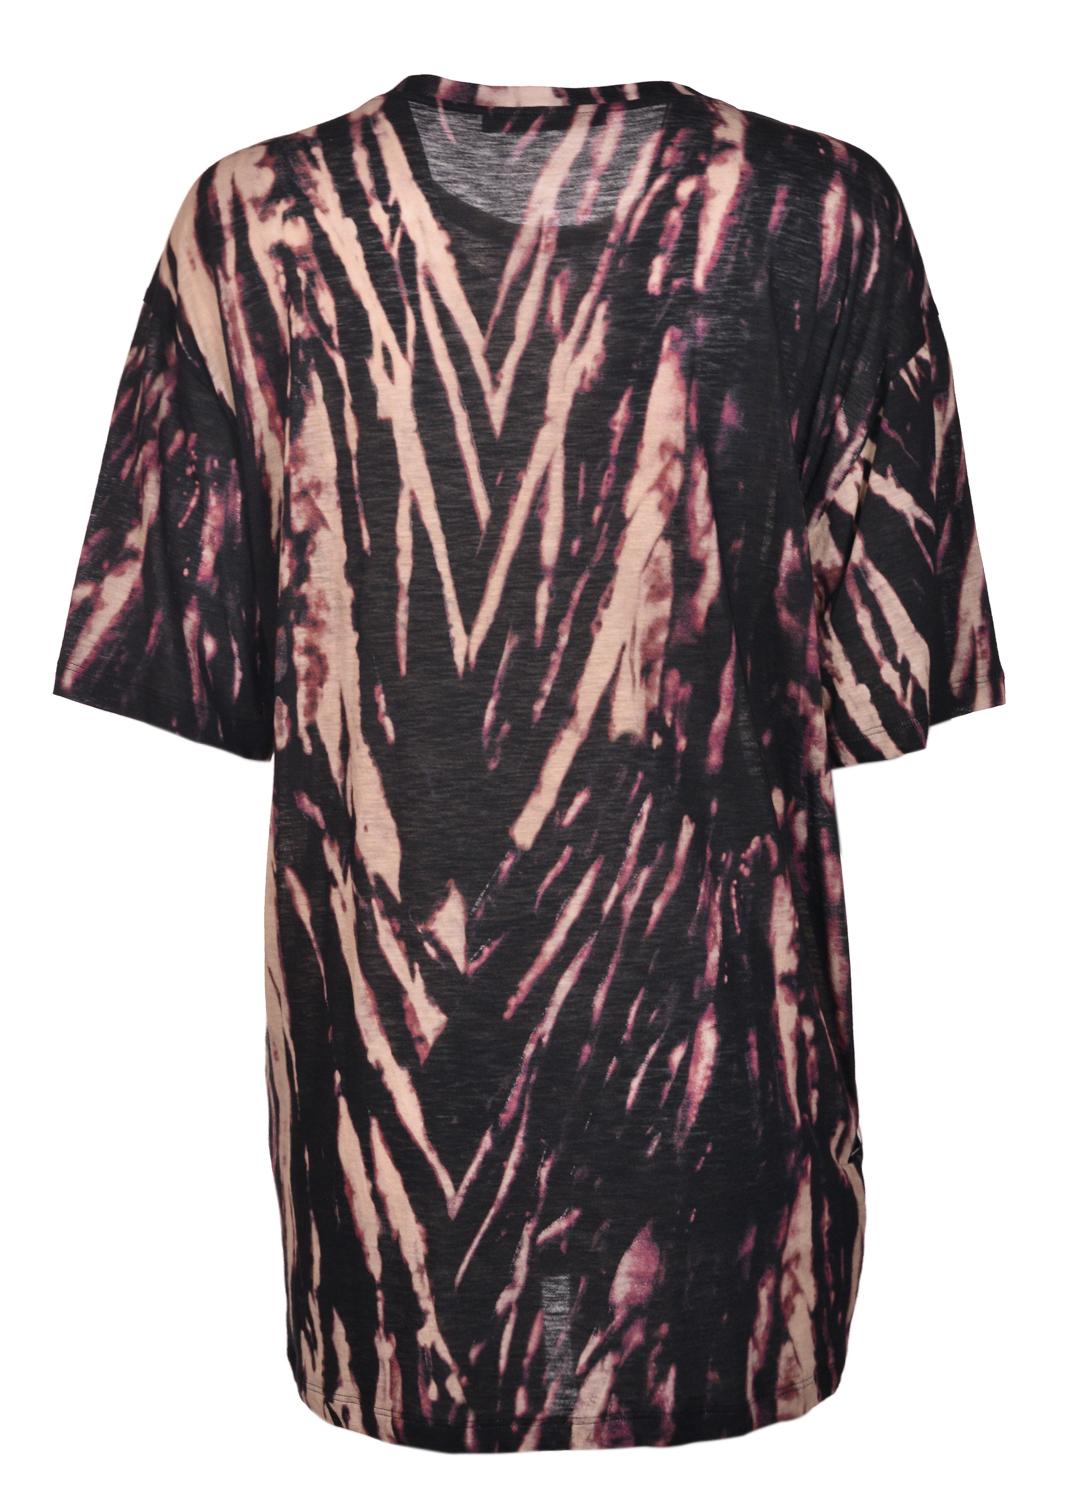 Roberto Cavalli Womens Black Tie Dye Tunic T Shirt In New Condition For Sale In Brooklyn, NY